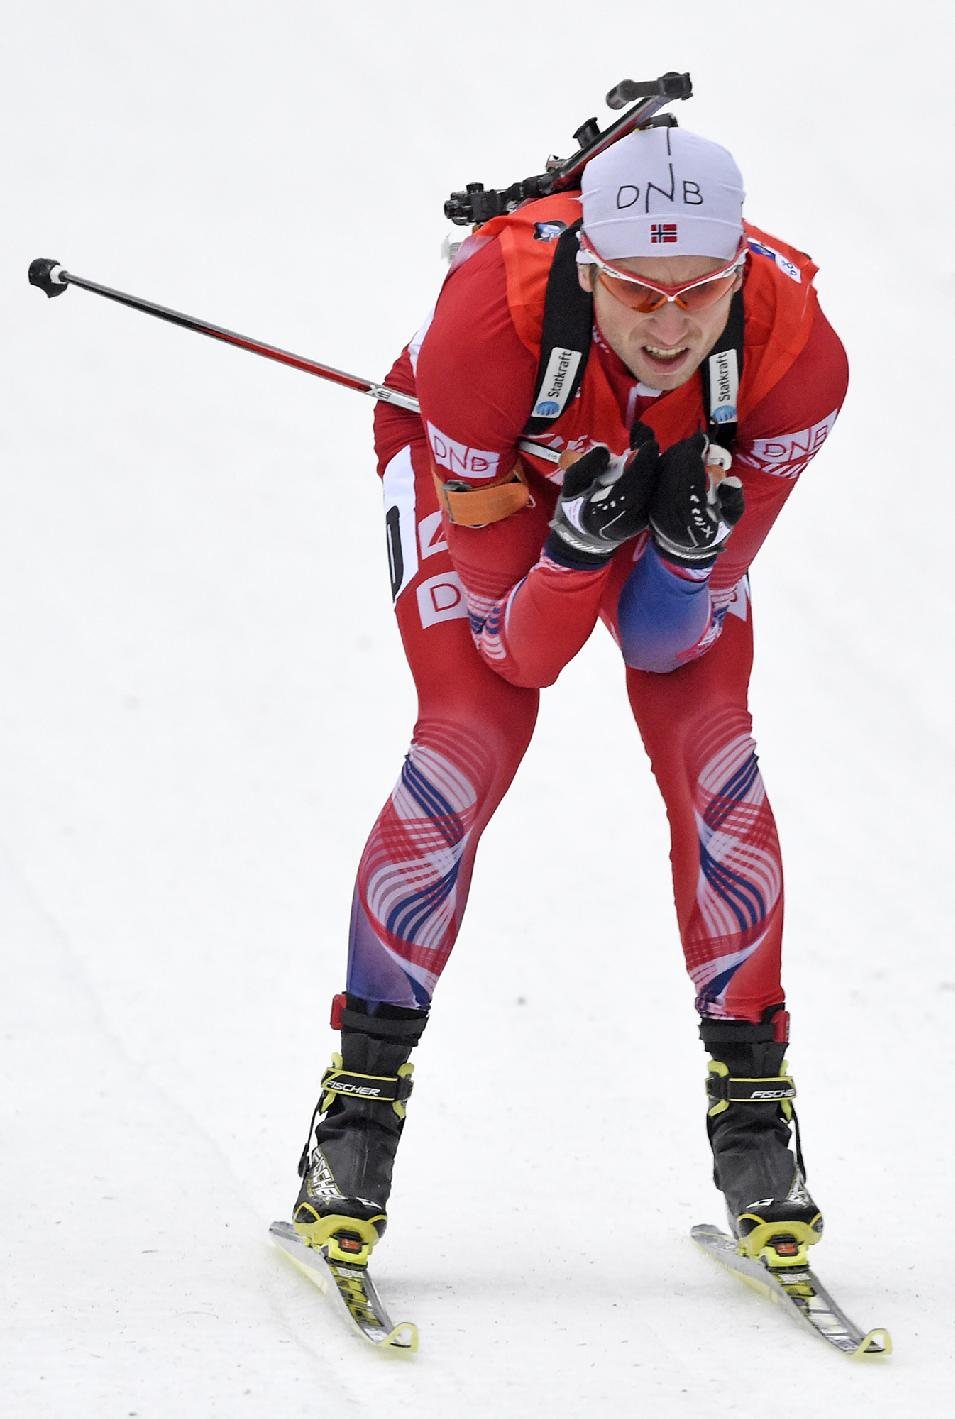 Alexander Os of Norway skis during the men's 10 kilometers фото (photo)